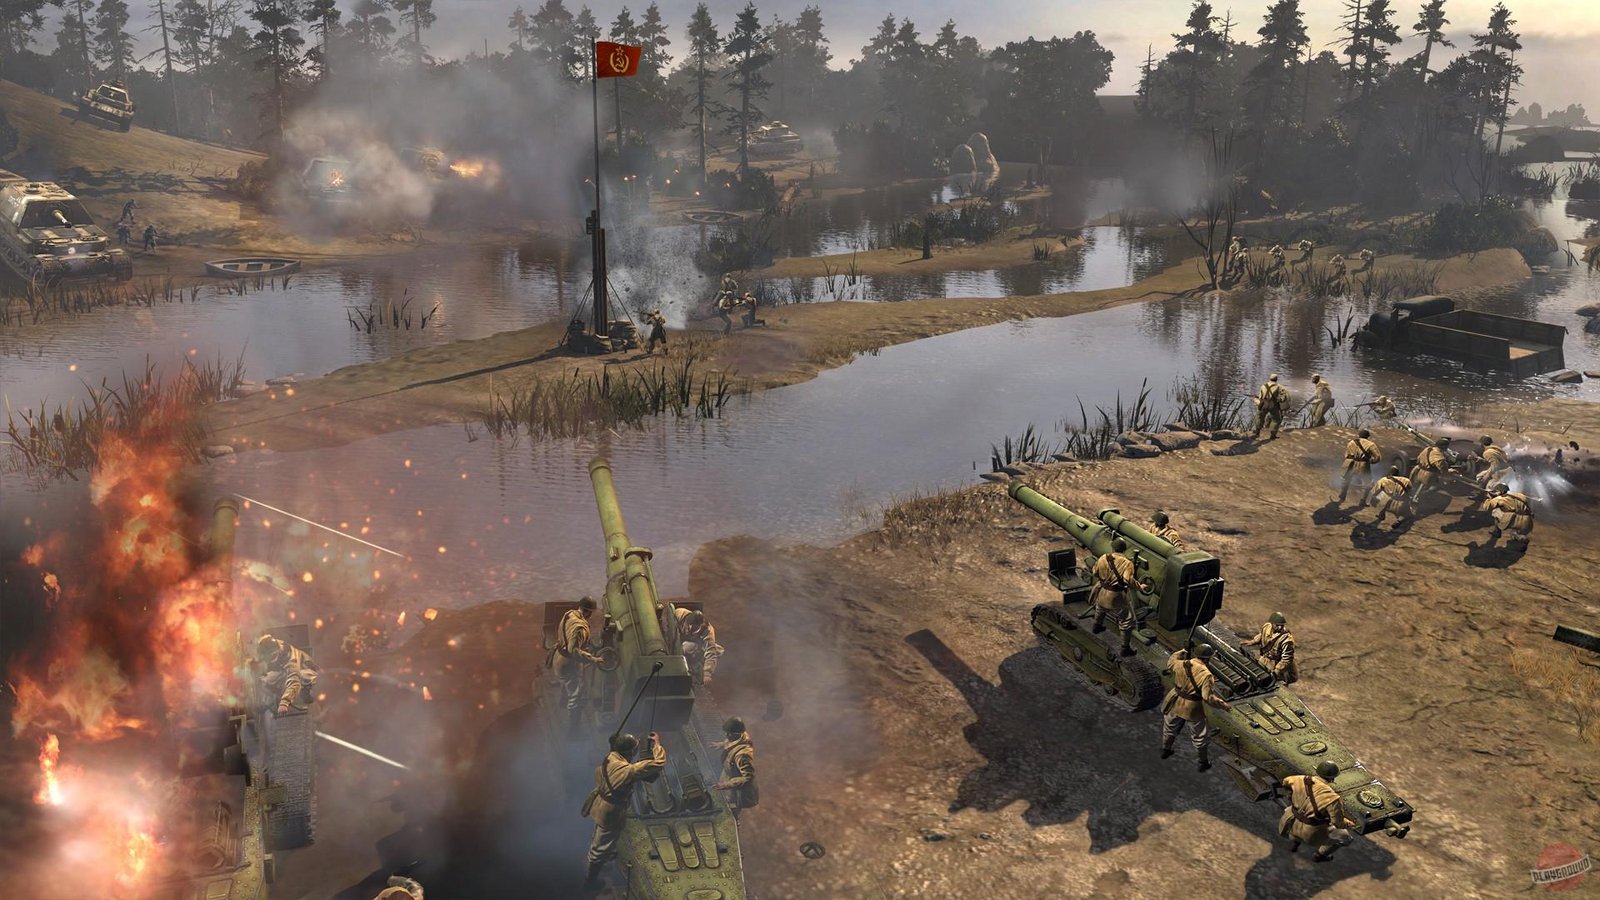 Company of Heroes 2: The Western Front Armies